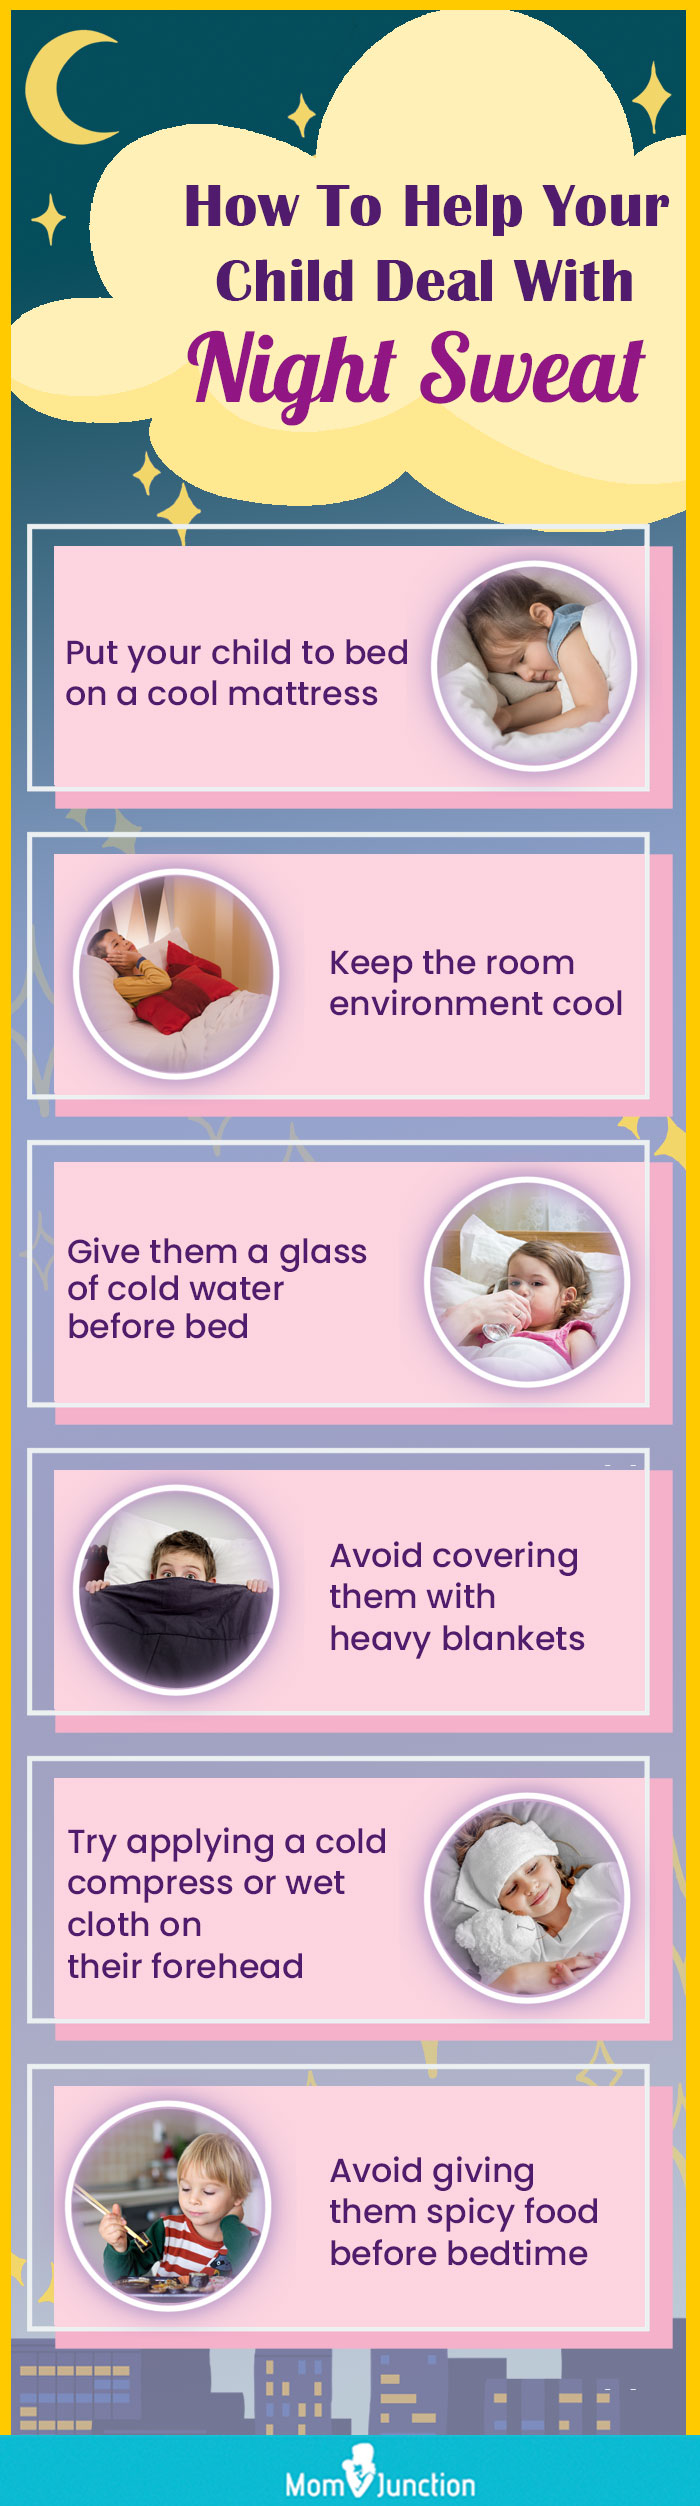 how to help your child deal with night sweat (infographic)